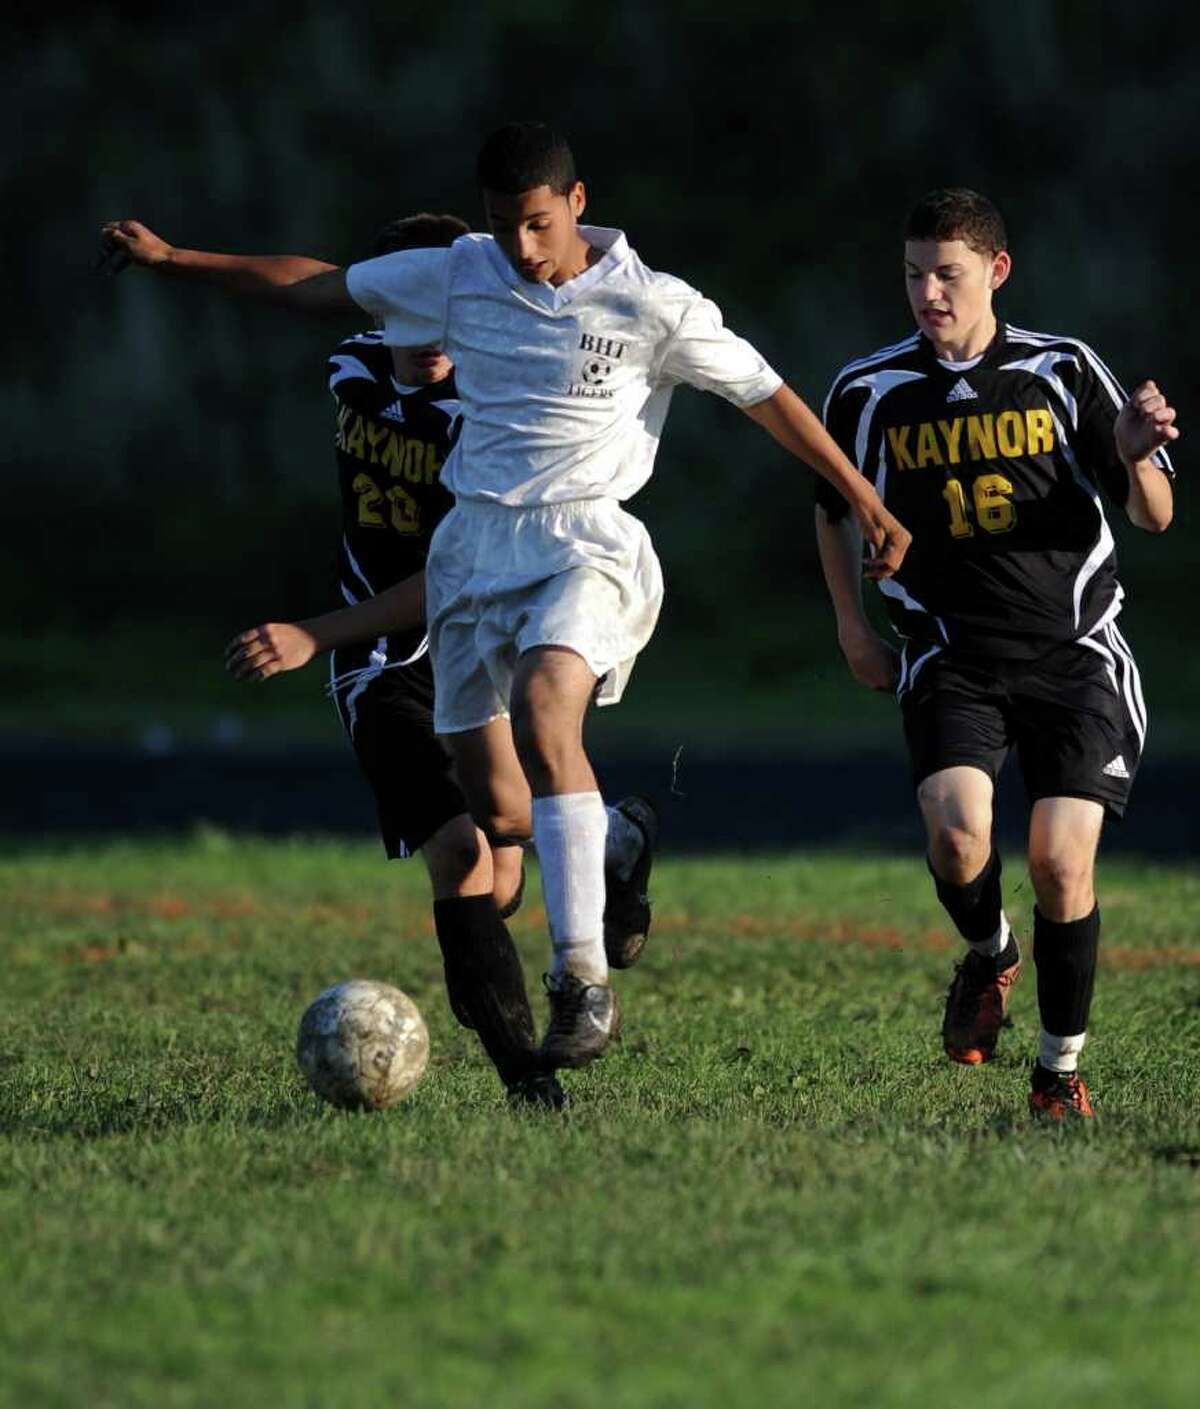 Bullard-Havens' Ronald Champlin controls the ball as Kaynor Tech's Cullen McCormack, left, and Justin Ramone defend during their soccer match Wednesday, Oct. 5, 2011 at the Bullard Havens campus in Bridgeport, Conn.